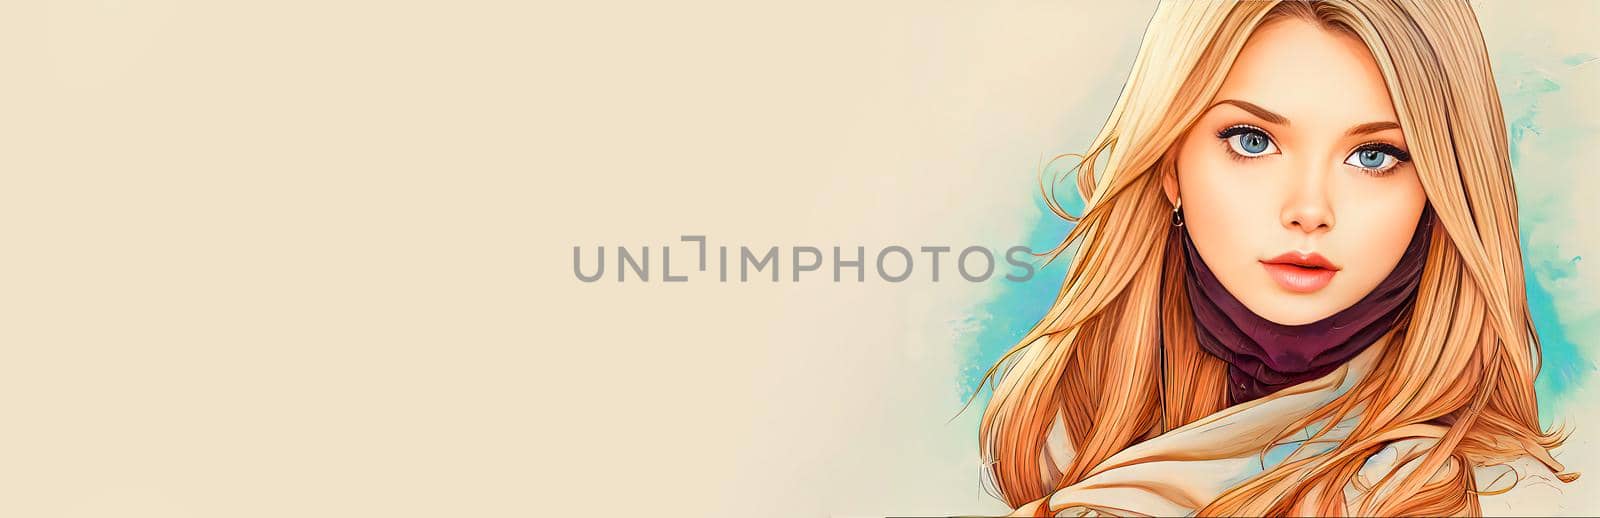 Modern fashion model caucasian blonde girl wearing scarf. Suitable for banners, headers, flyers. Digital illustration